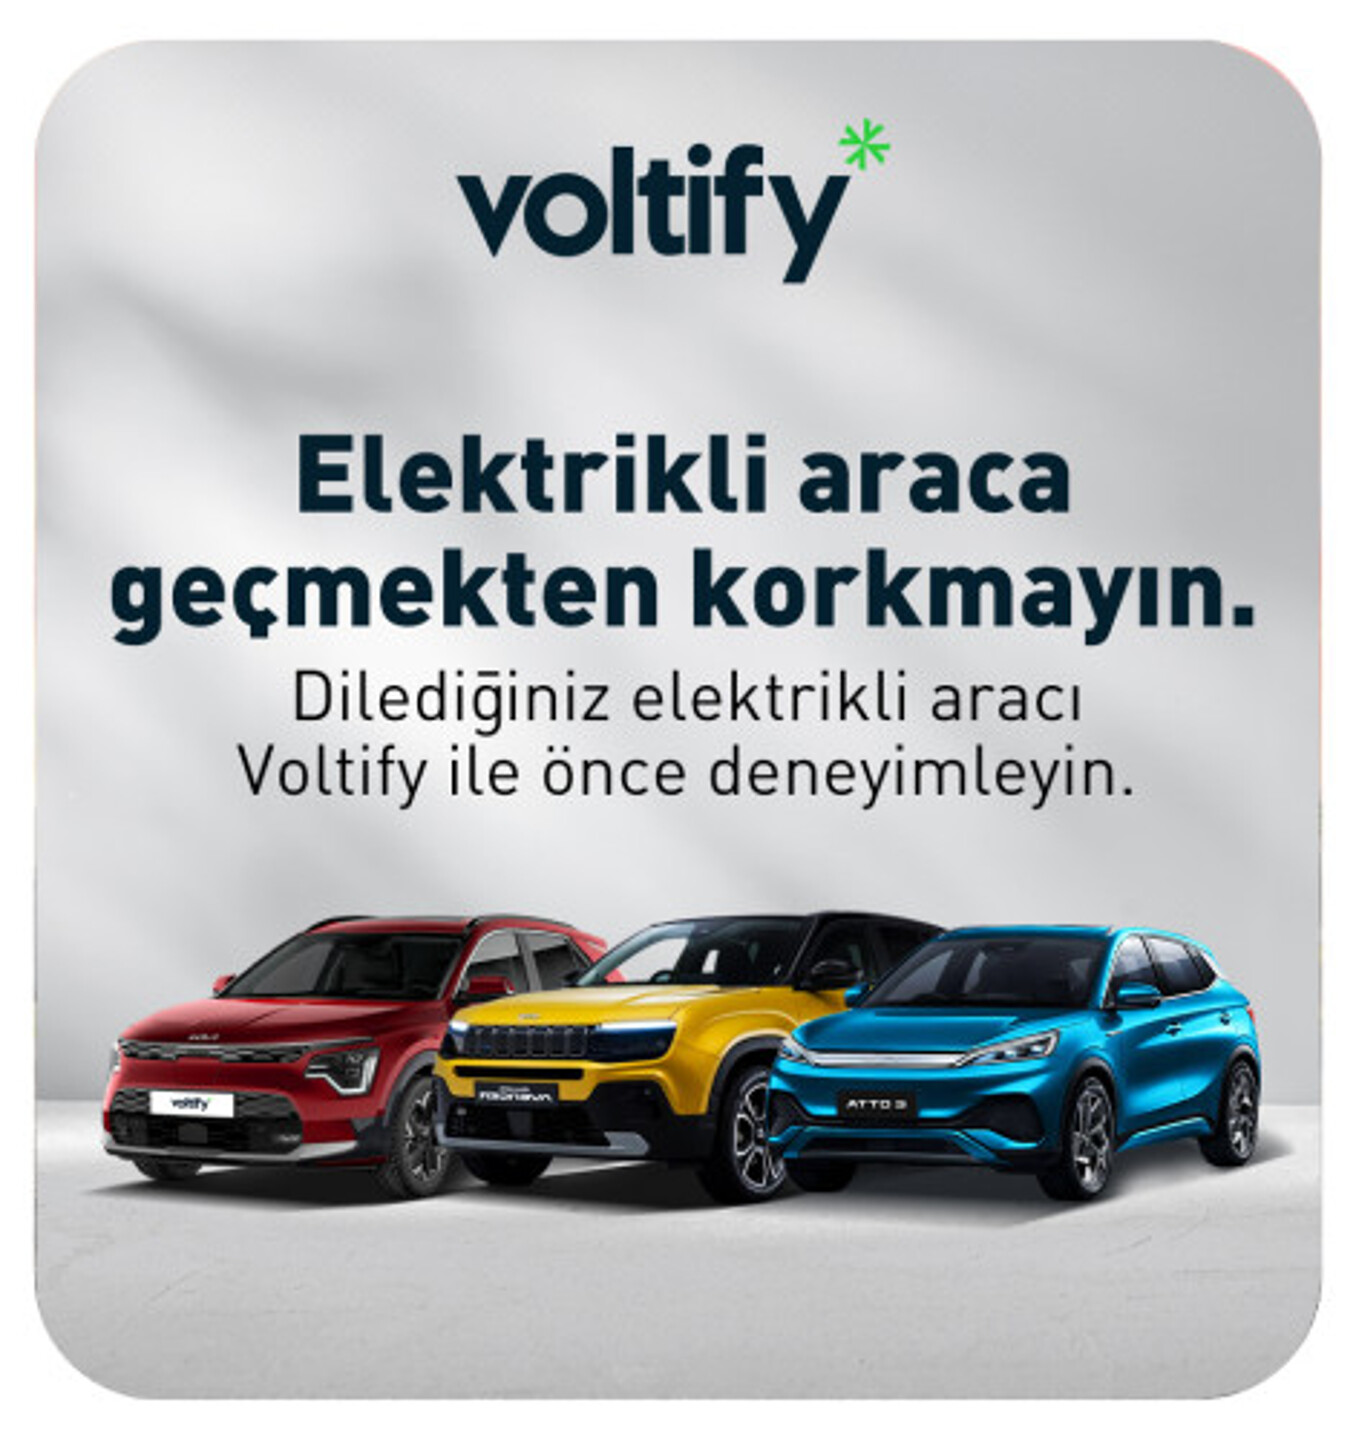 Voltify